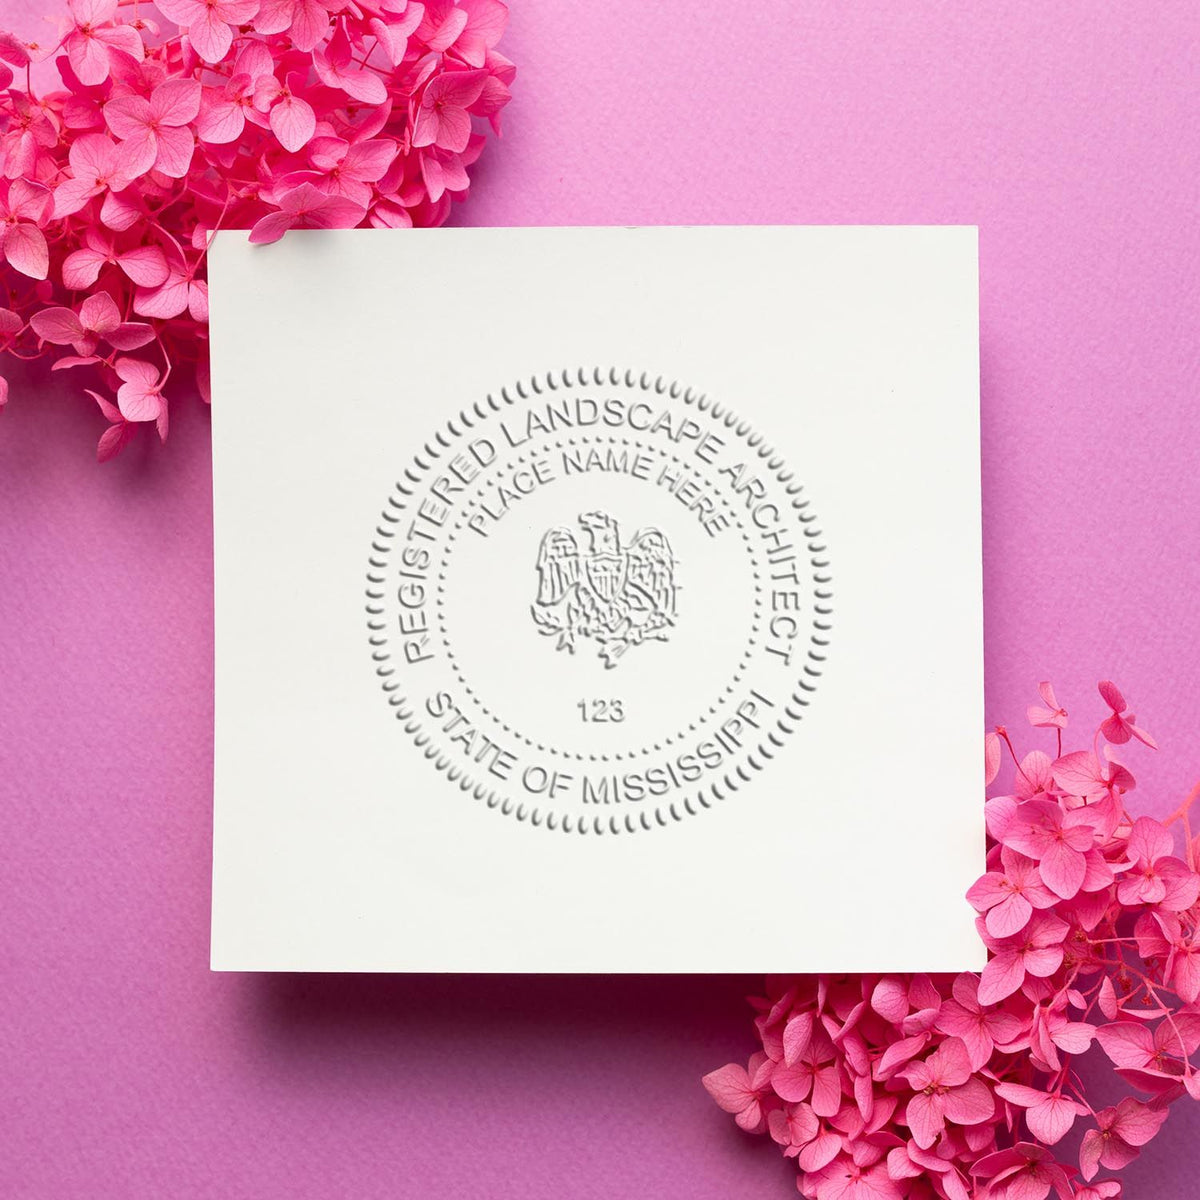 An in use photo of the Gift Mississippi Landscape Architect Seal showing a sample imprint on a cardstock